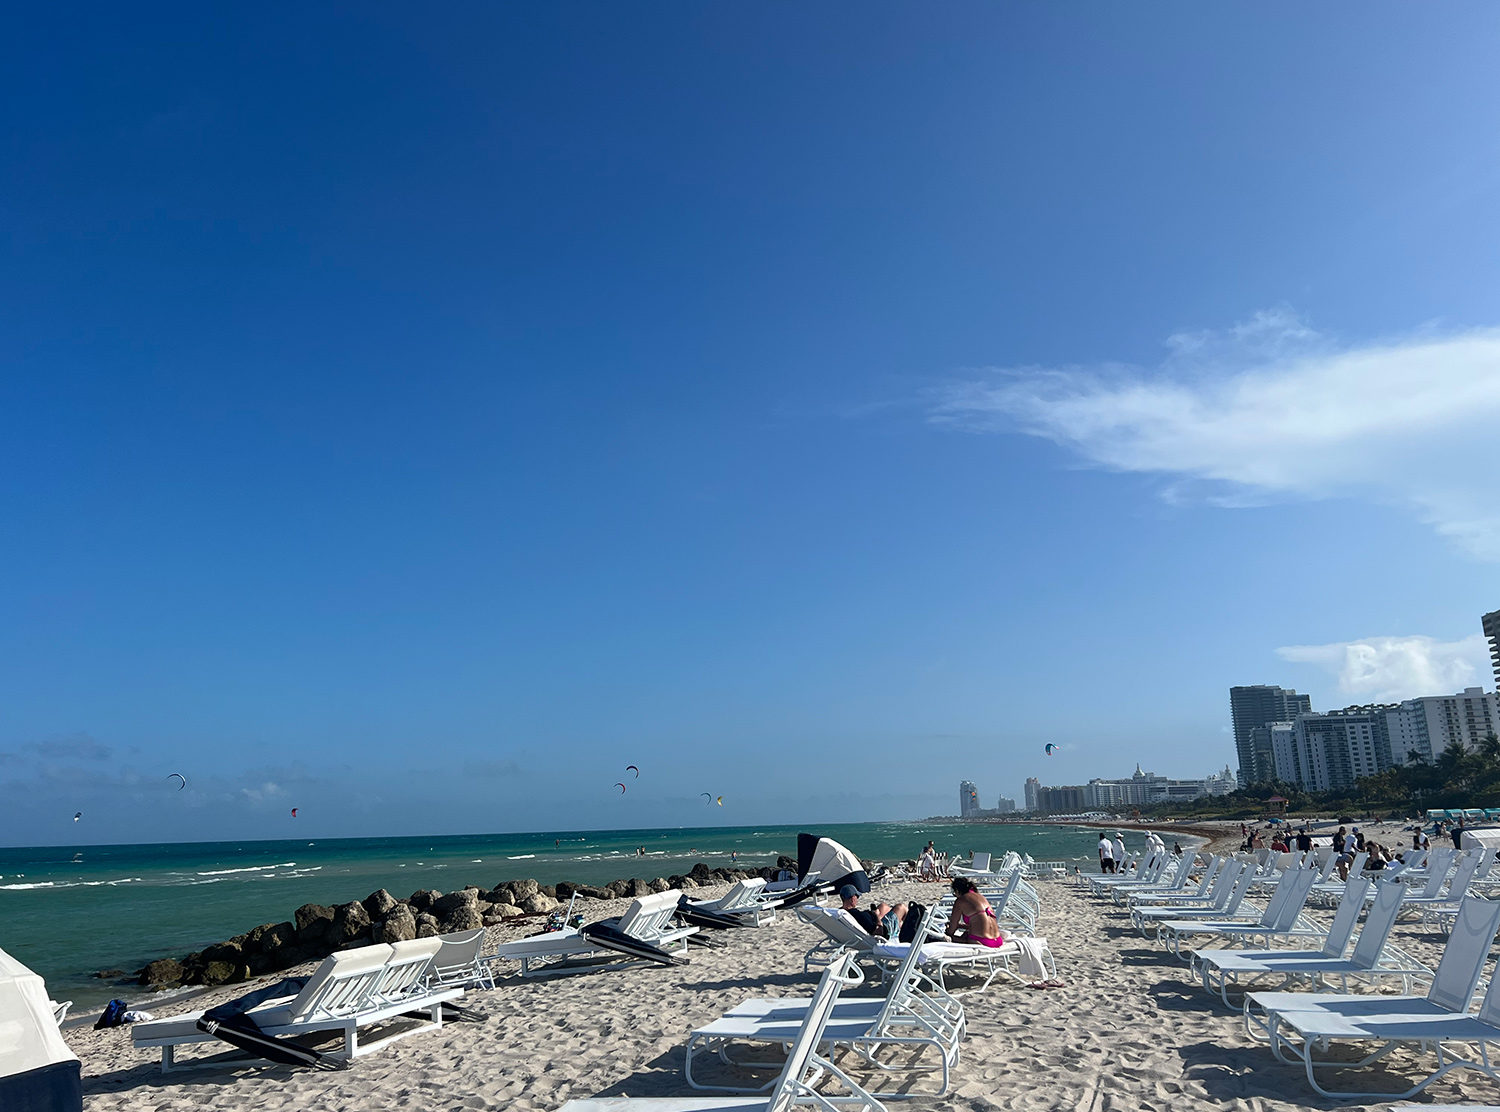 The Miami Beach EDITION Sun, sands and sea — your typical